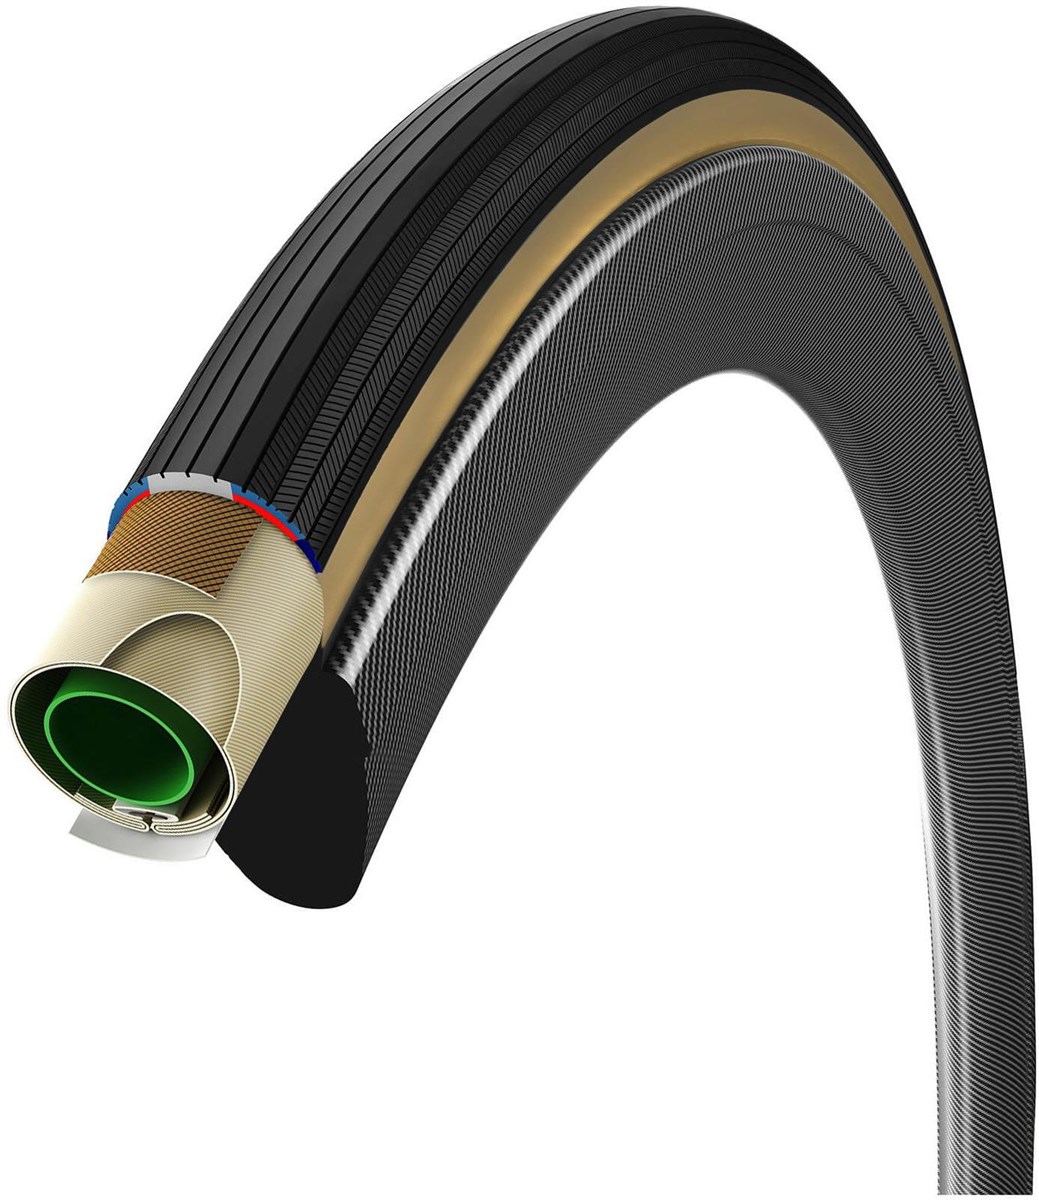 Vittoria Corsa Control G+ Isotech Tubular Road Tyre product image